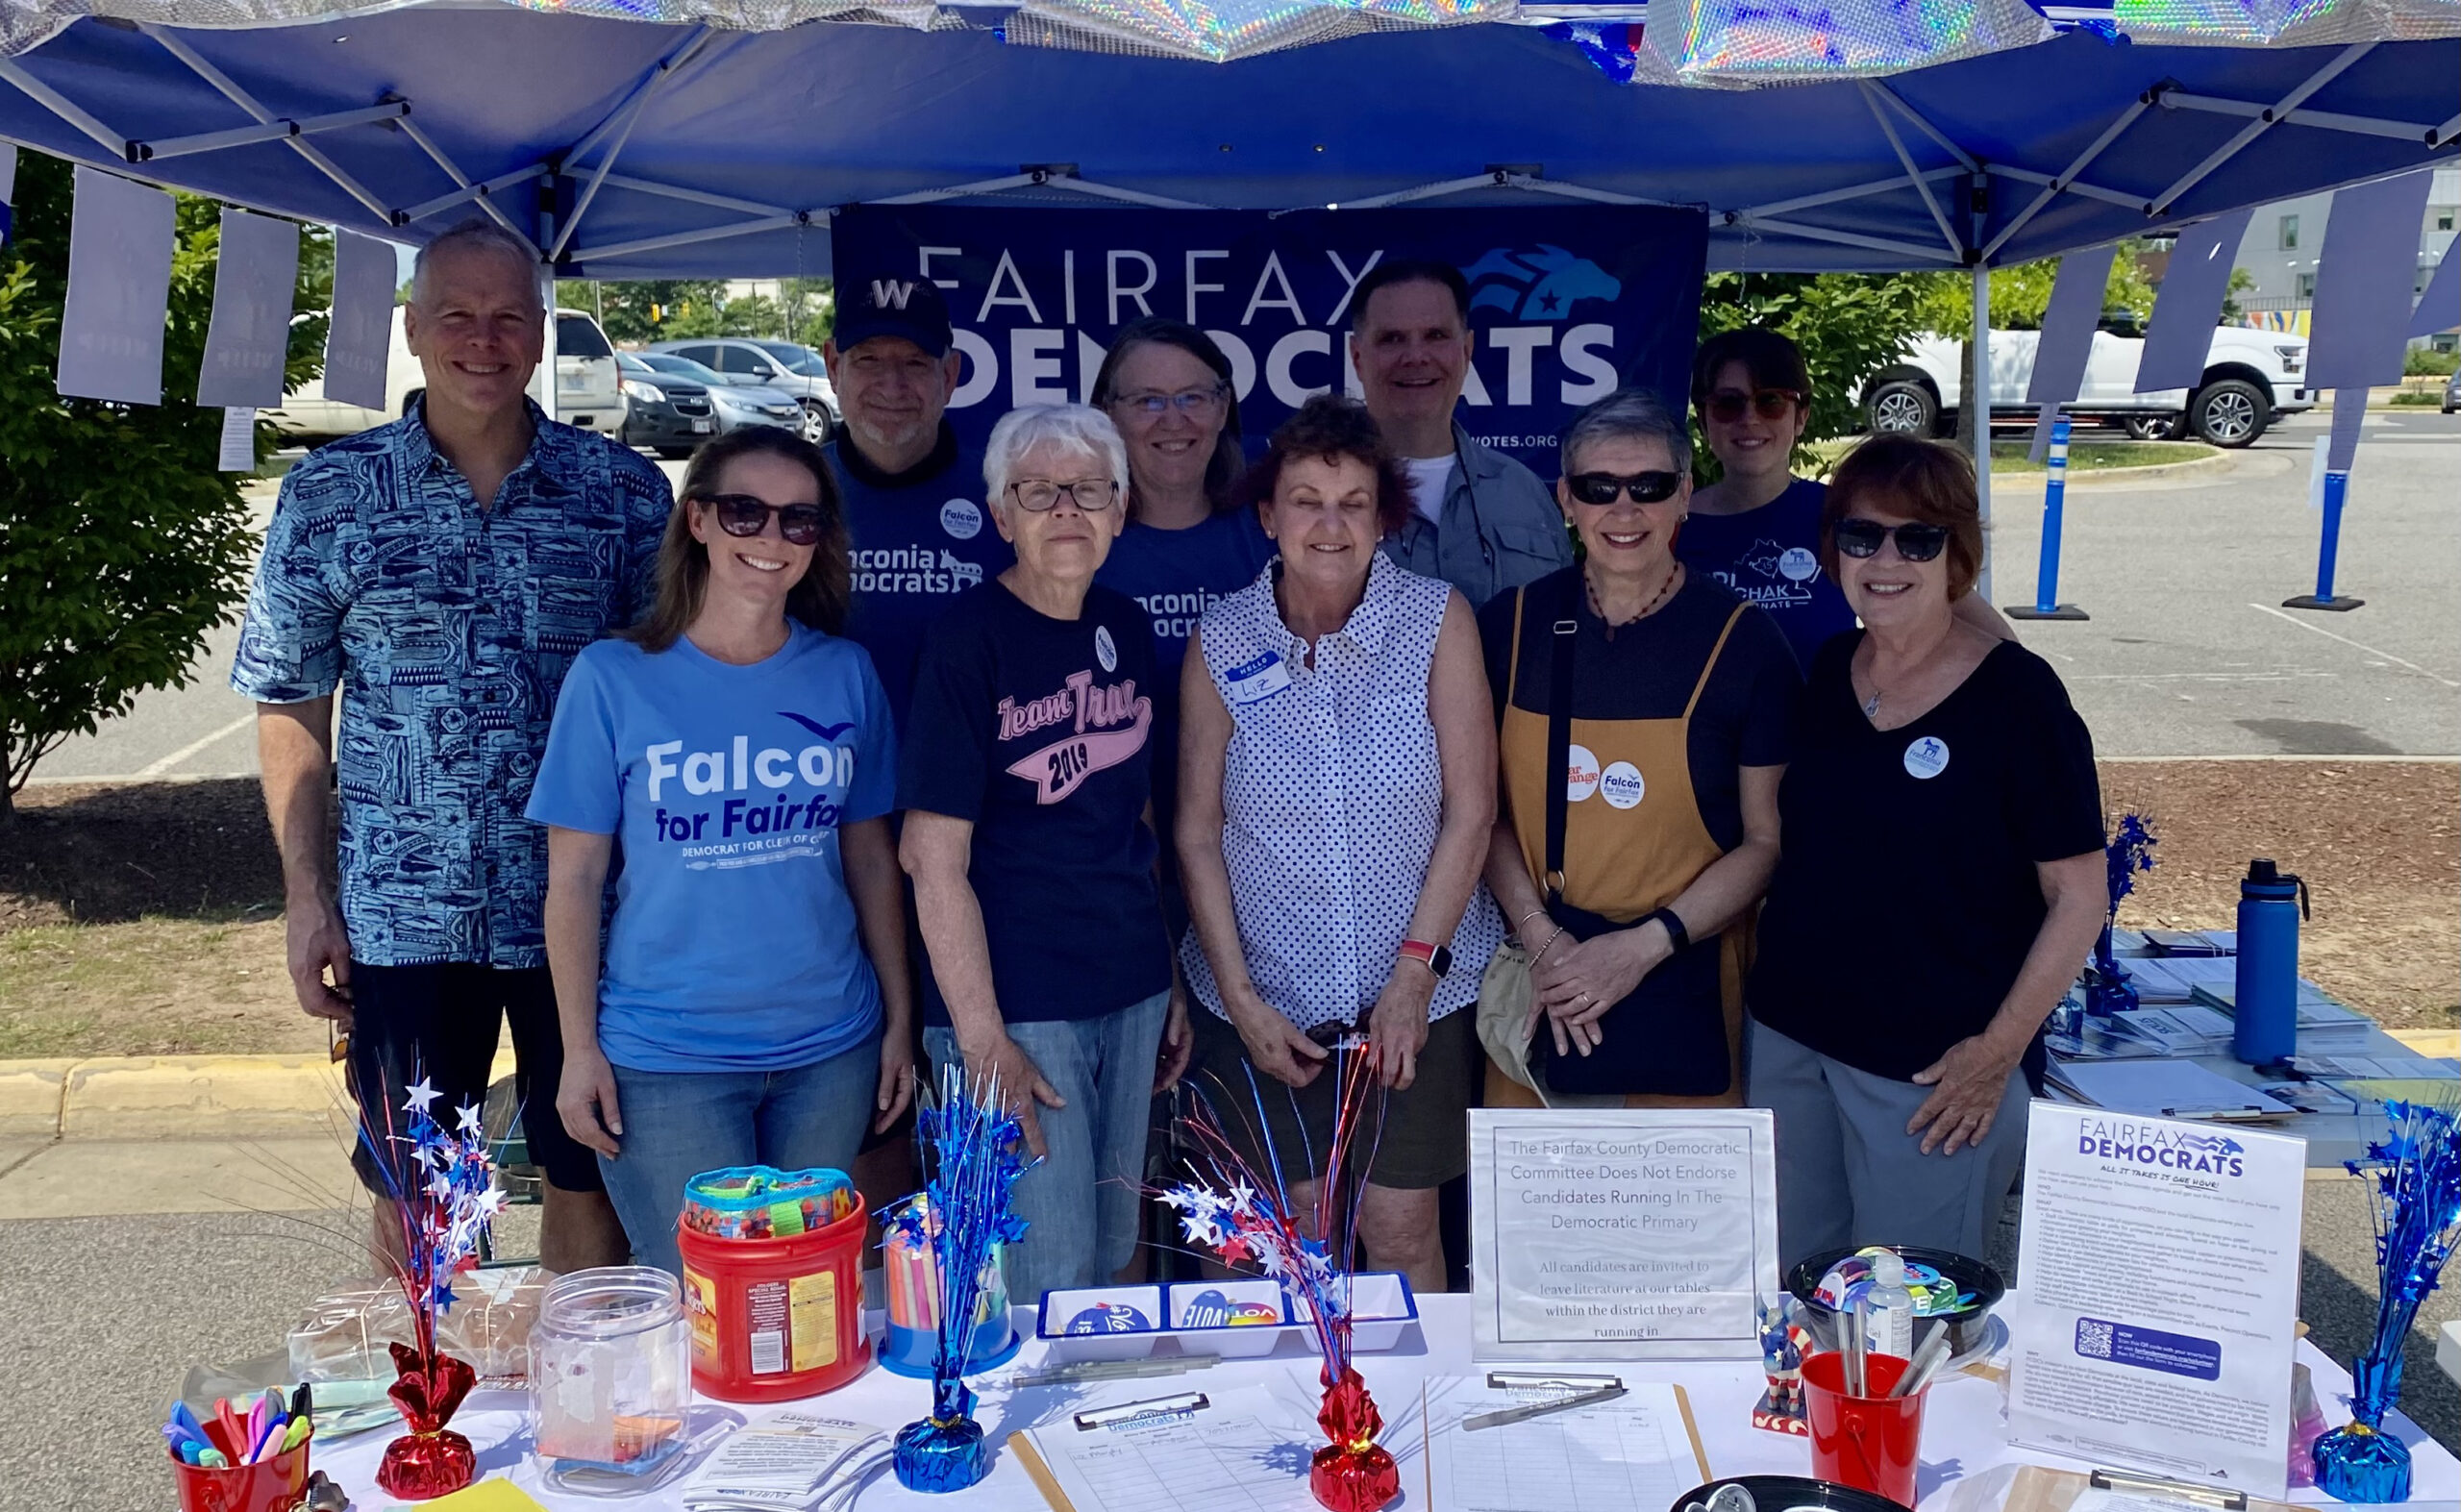 group of people at table with Fairfax Democrats sign in background